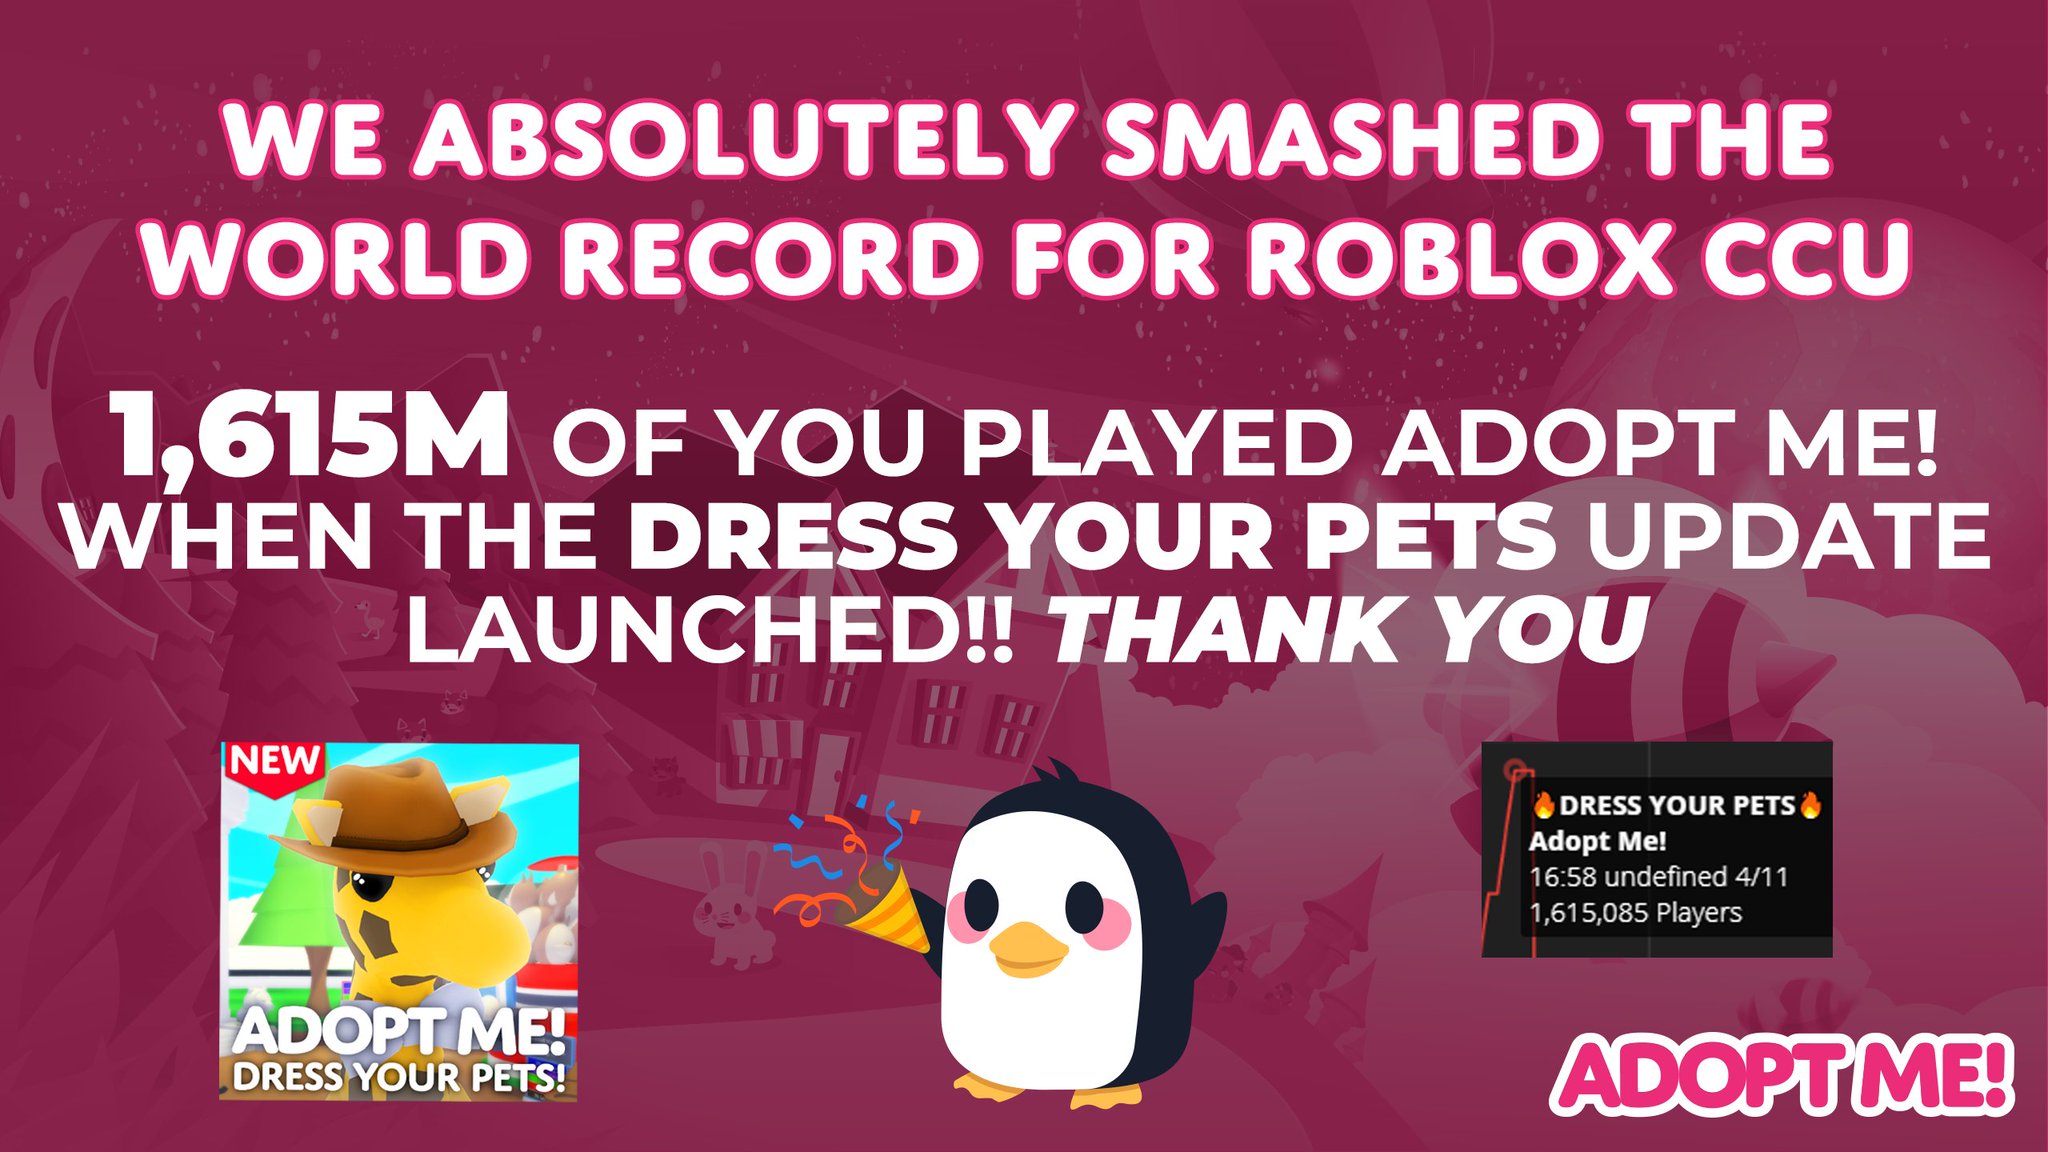 Adopt Me On Twitter The New World Record For Roblox Ccu Players Active Is 1 615 Million Players Thank You So Much For Tuning In To See The Live Event And Apologies - adopt me hit nearly 500000 players roblox